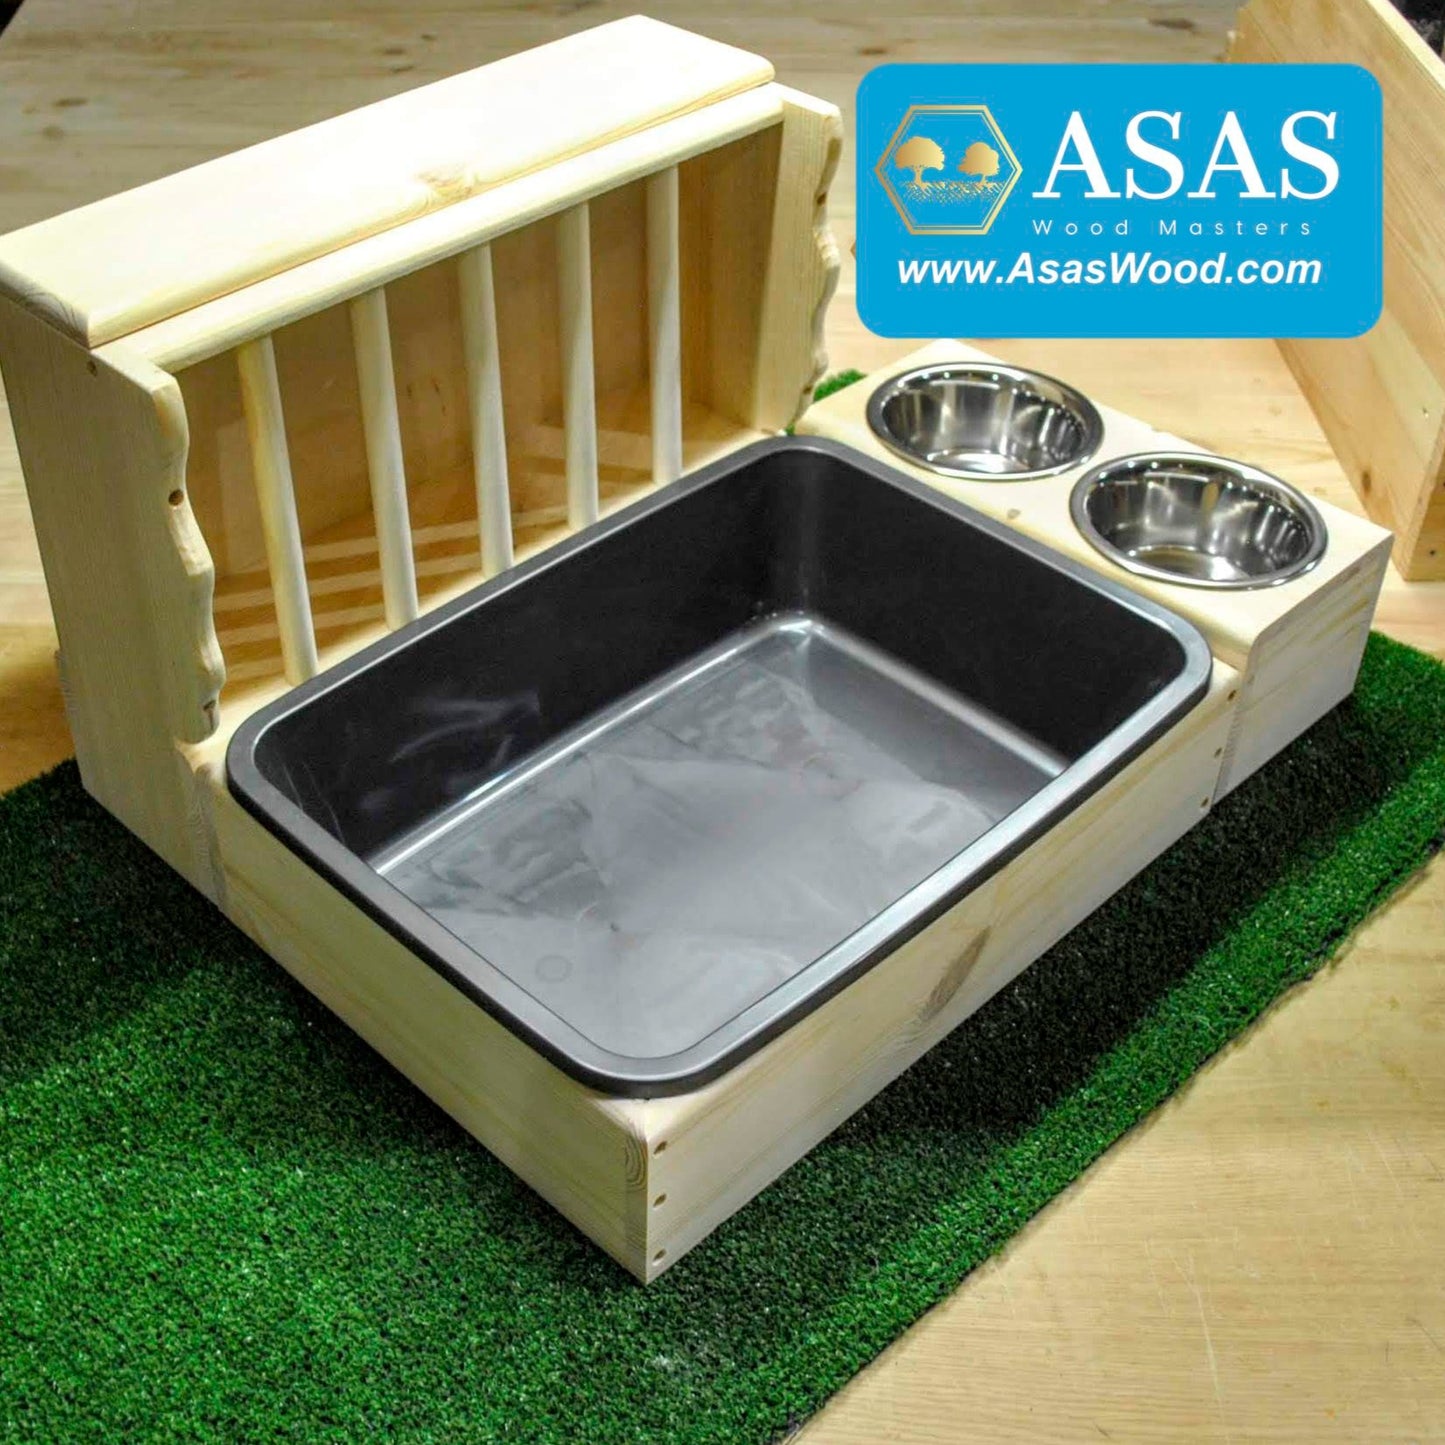 wooden bunny rabbit handmade hay feeder with litter box and food drink bowls